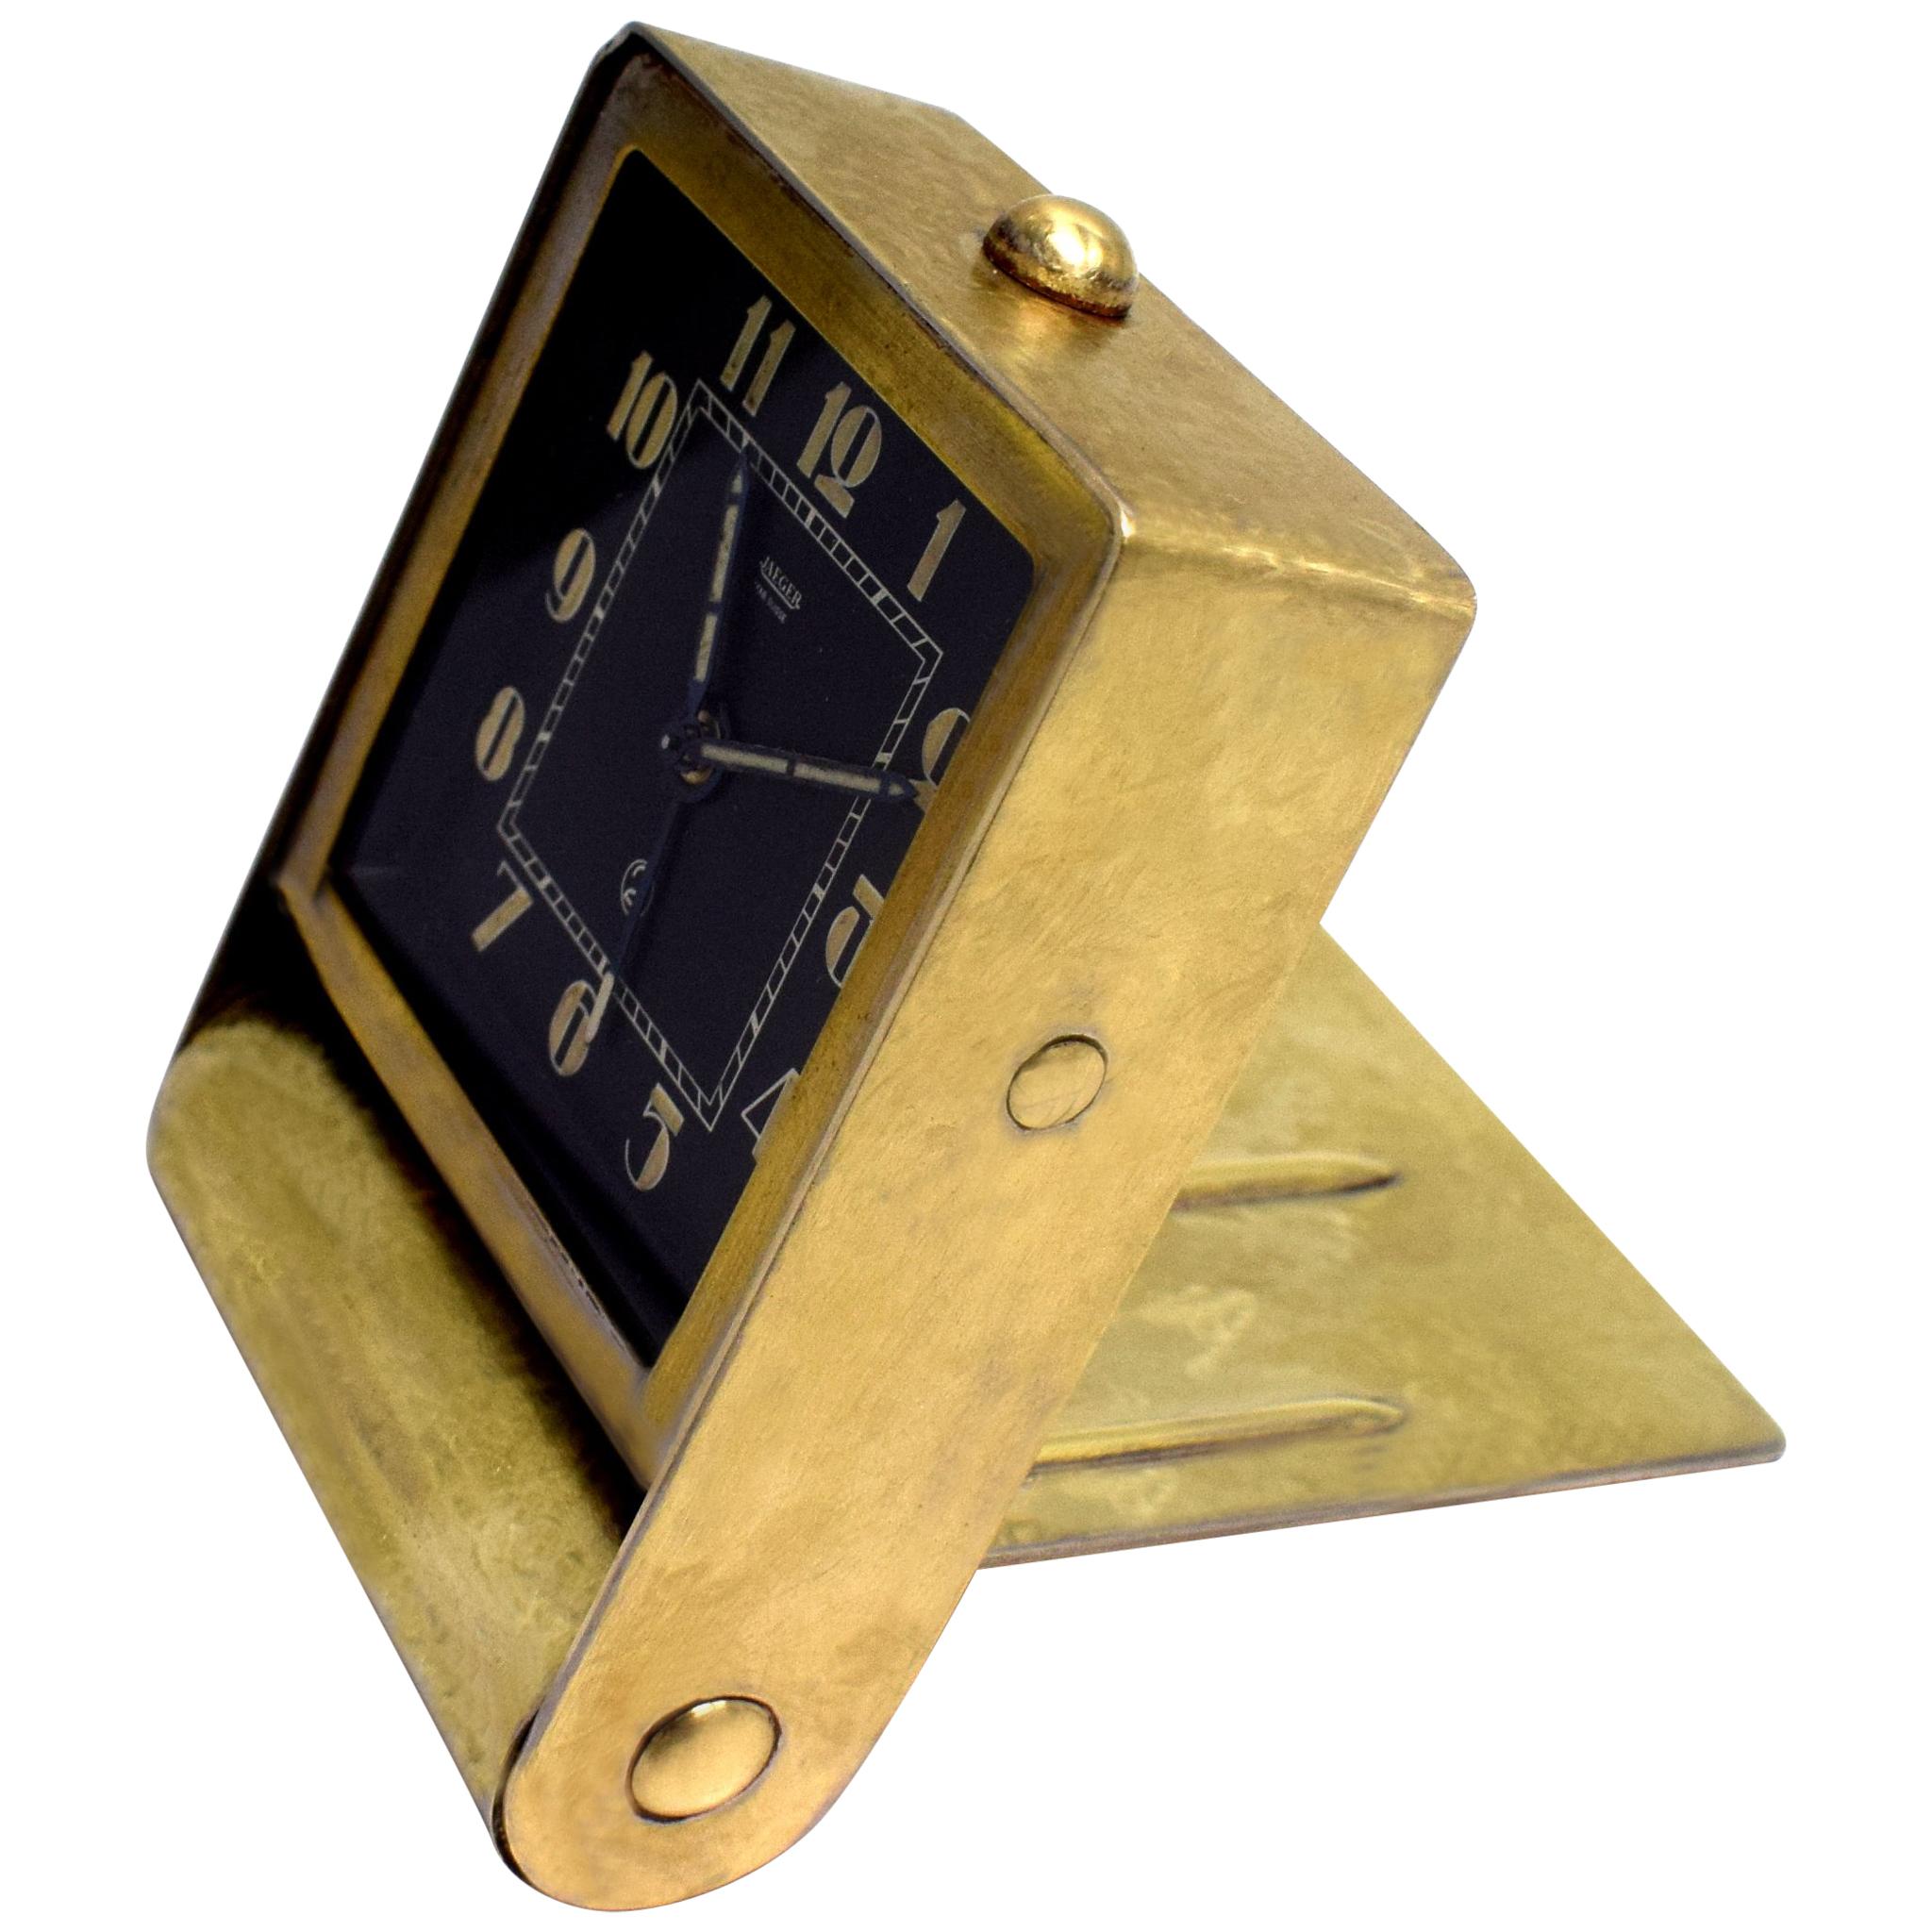 This is for a beautiful original and extremely stylish Art Deco desktop alarm clock made by Jaeger LeCoultre. It dates to the 1930s, it has a 30 hour movement and it has a gold toned scumbled effect metal casing with a back dial face and stylised